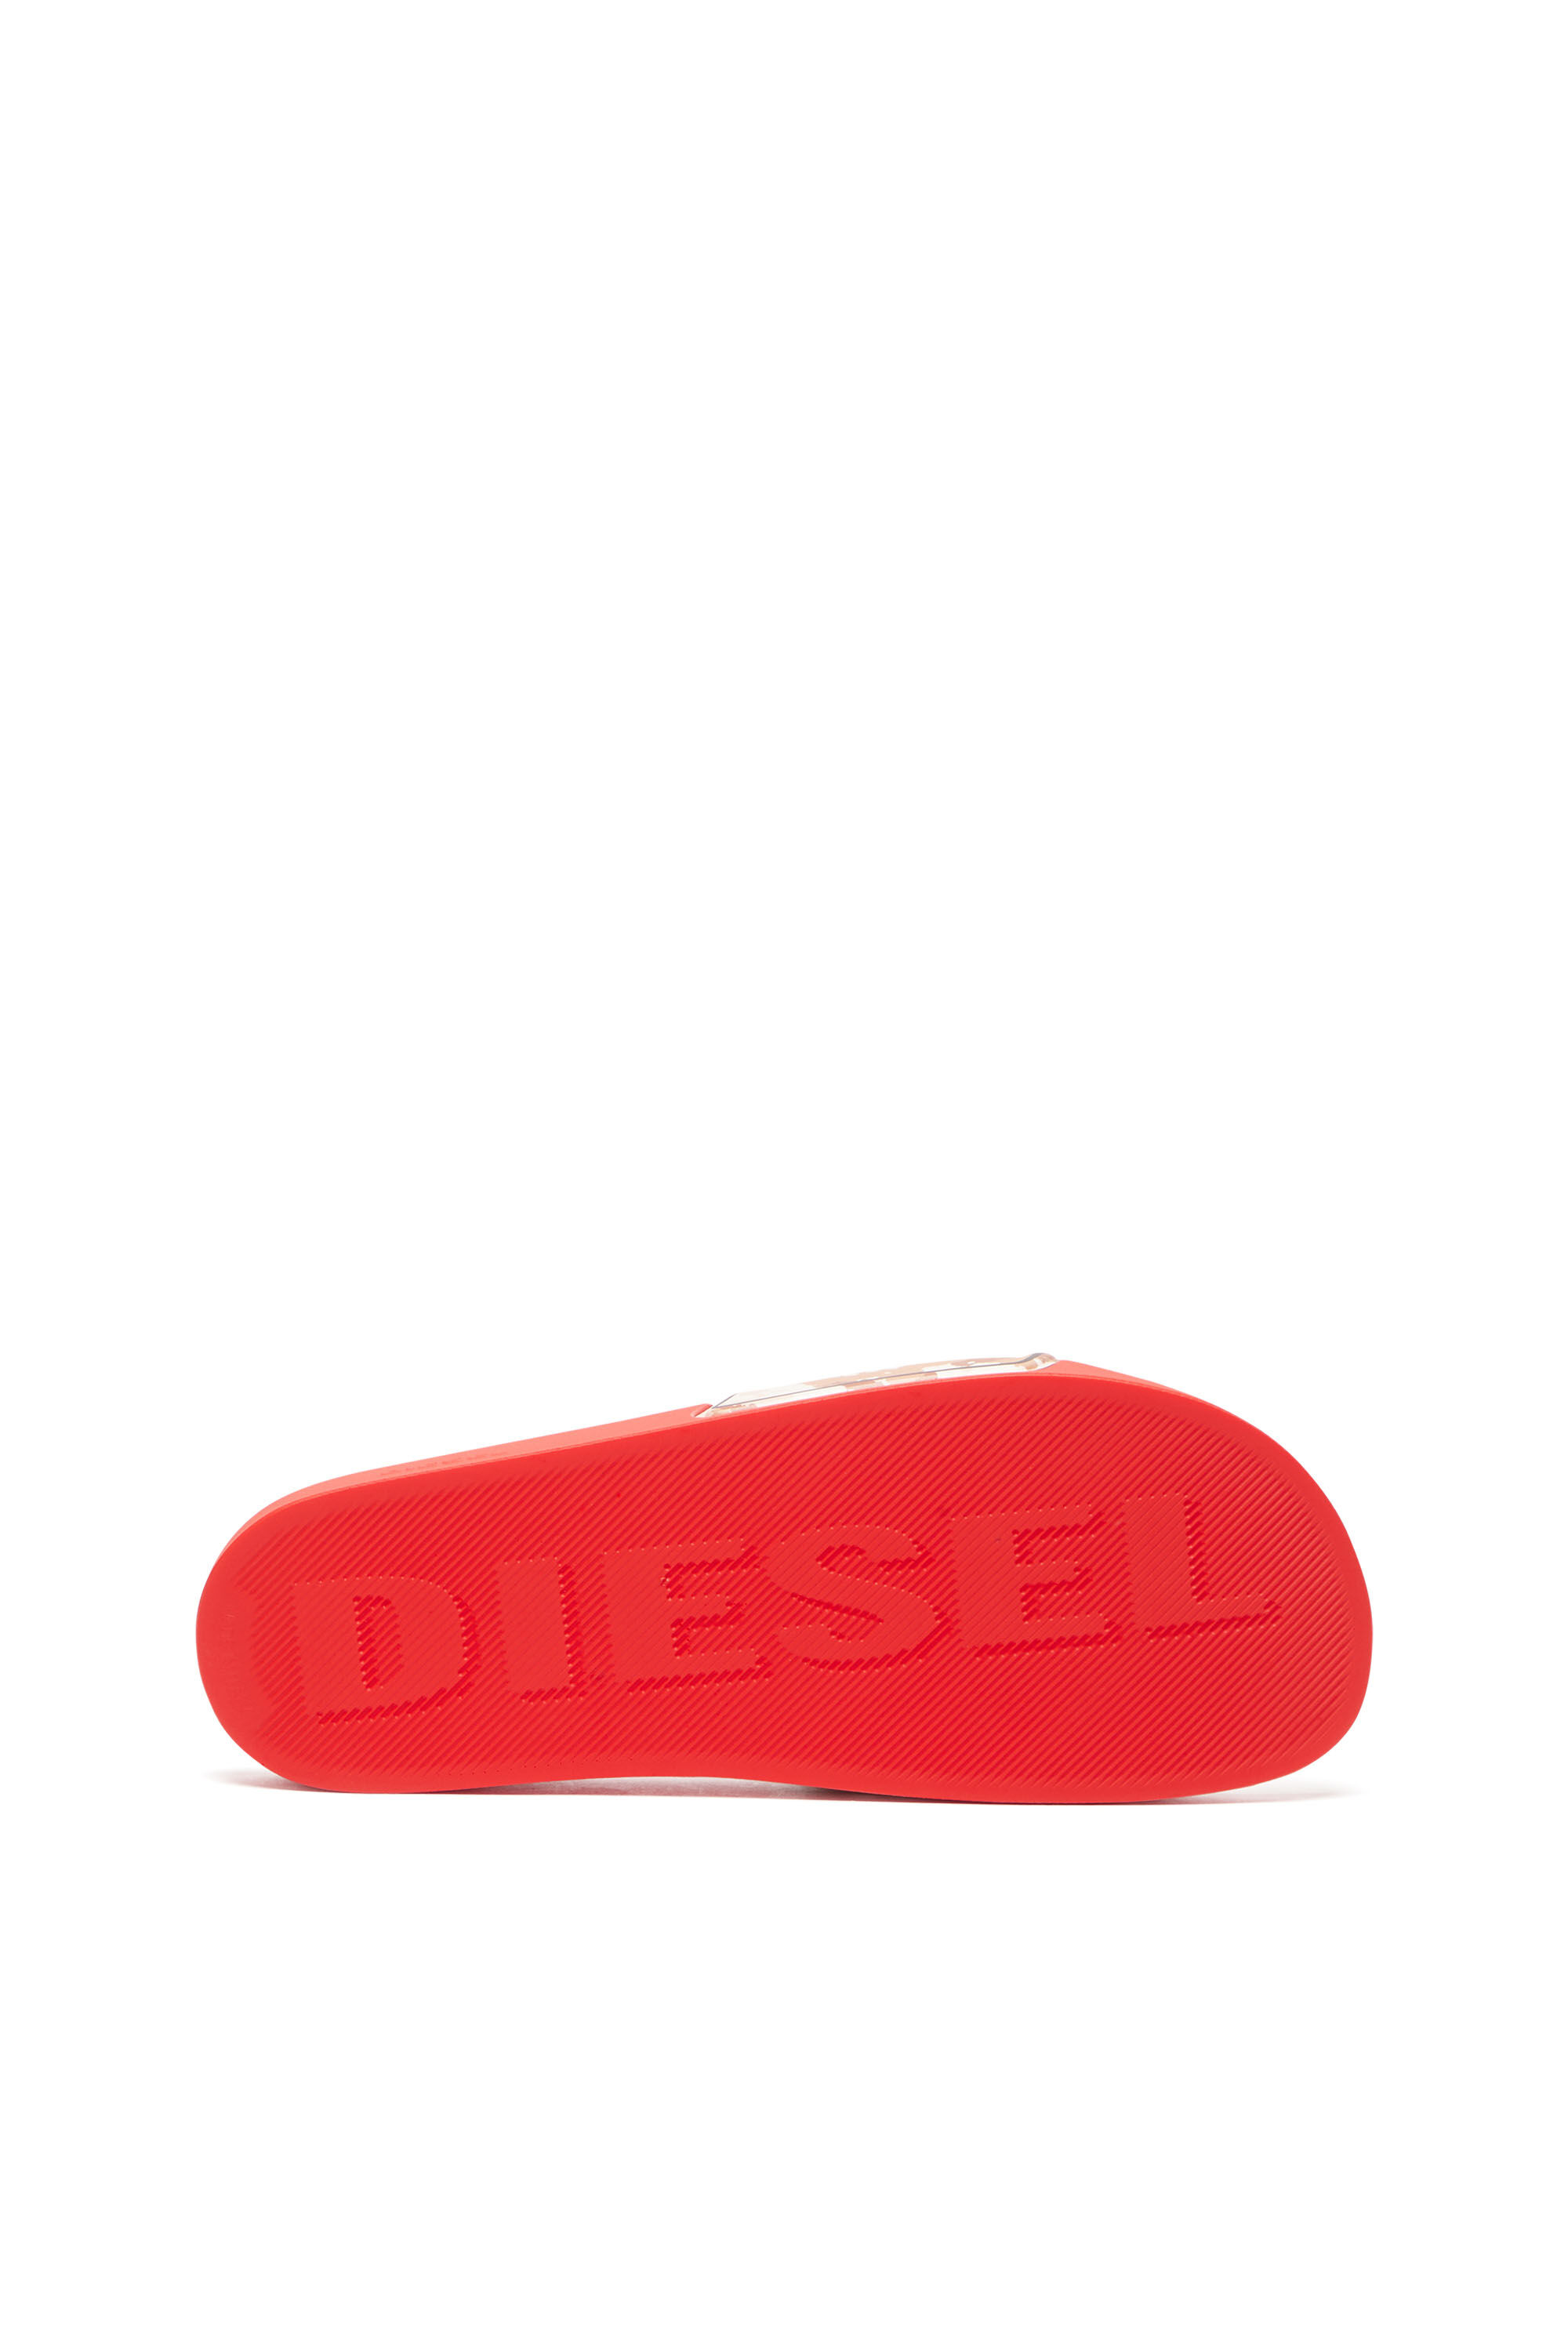 Diesel - SA-MAYEMI CC X, Unisex Sa-Mayemi CC X - Pool slides with camouflage band in Red - Image 5